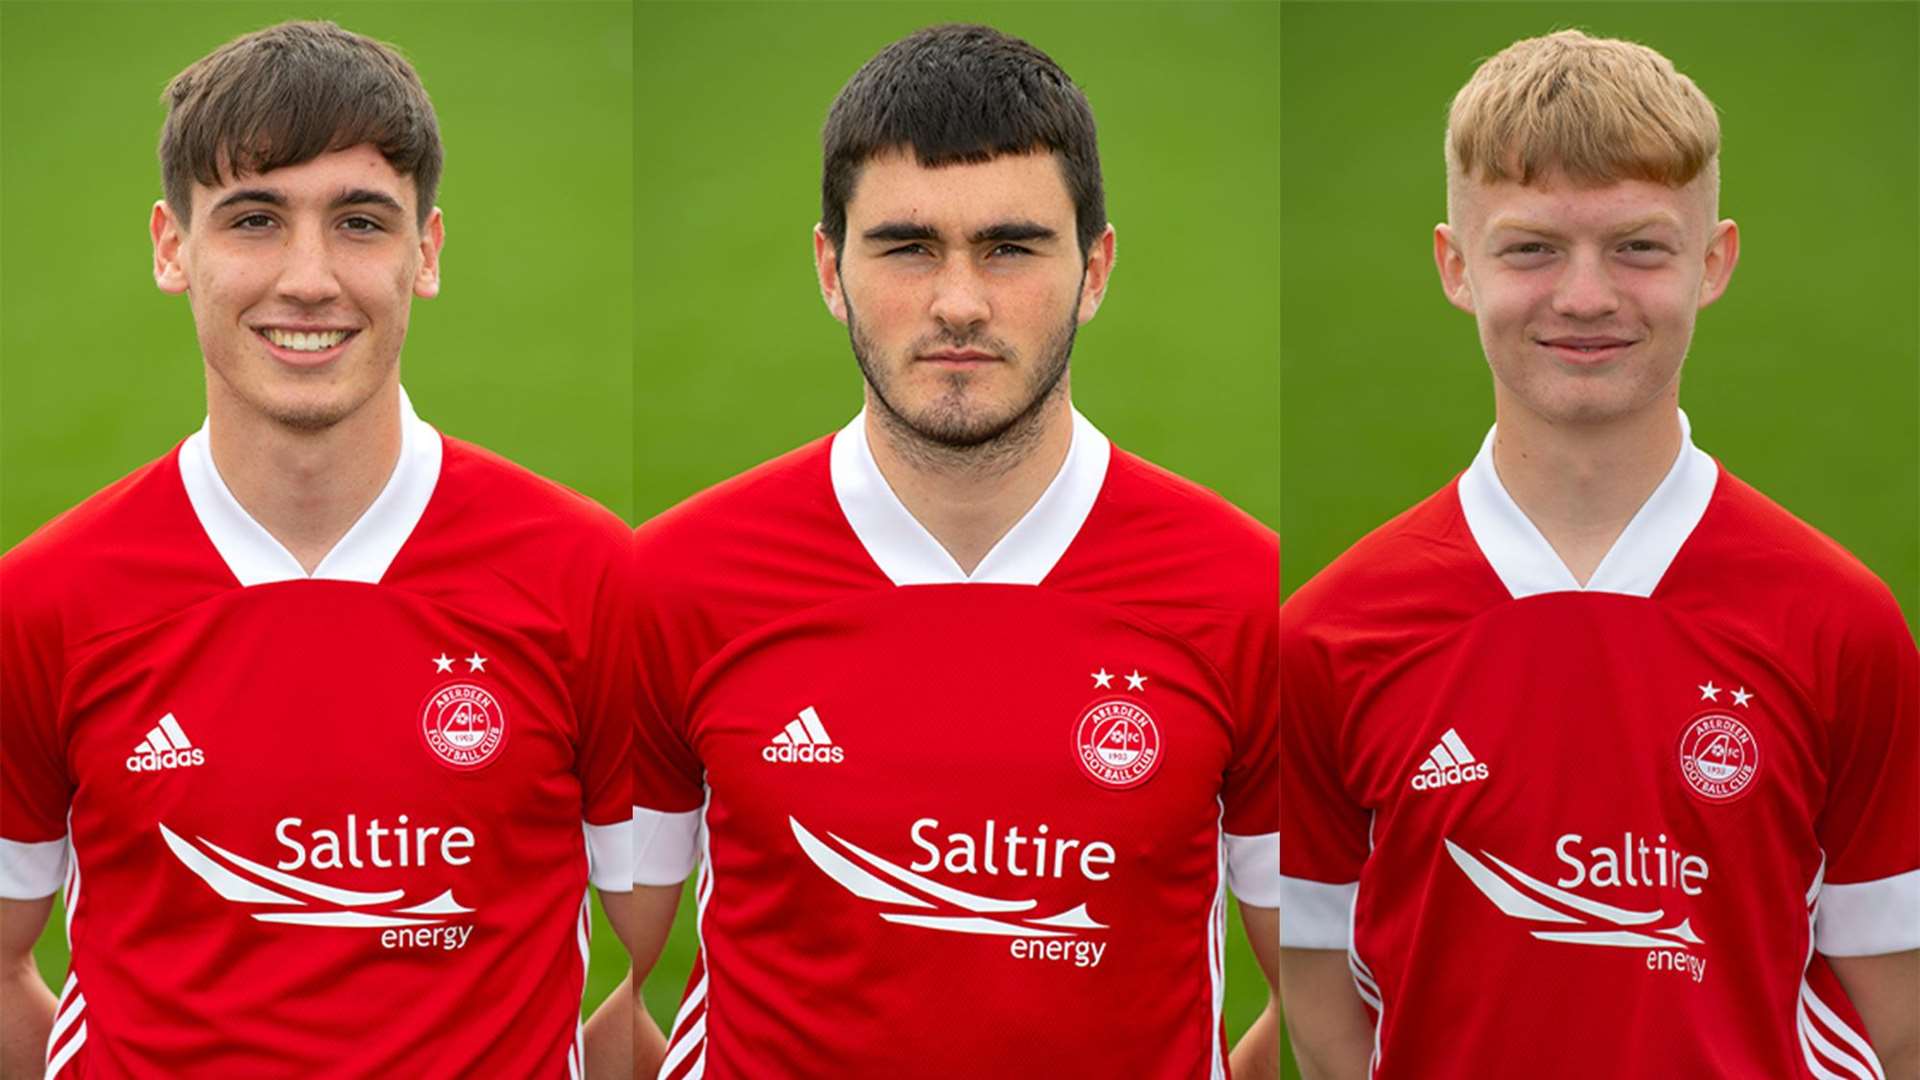 Aberdeen Development have put Connor Power, Luke Turner and Tyler Mykyta out on loan to Turriff.